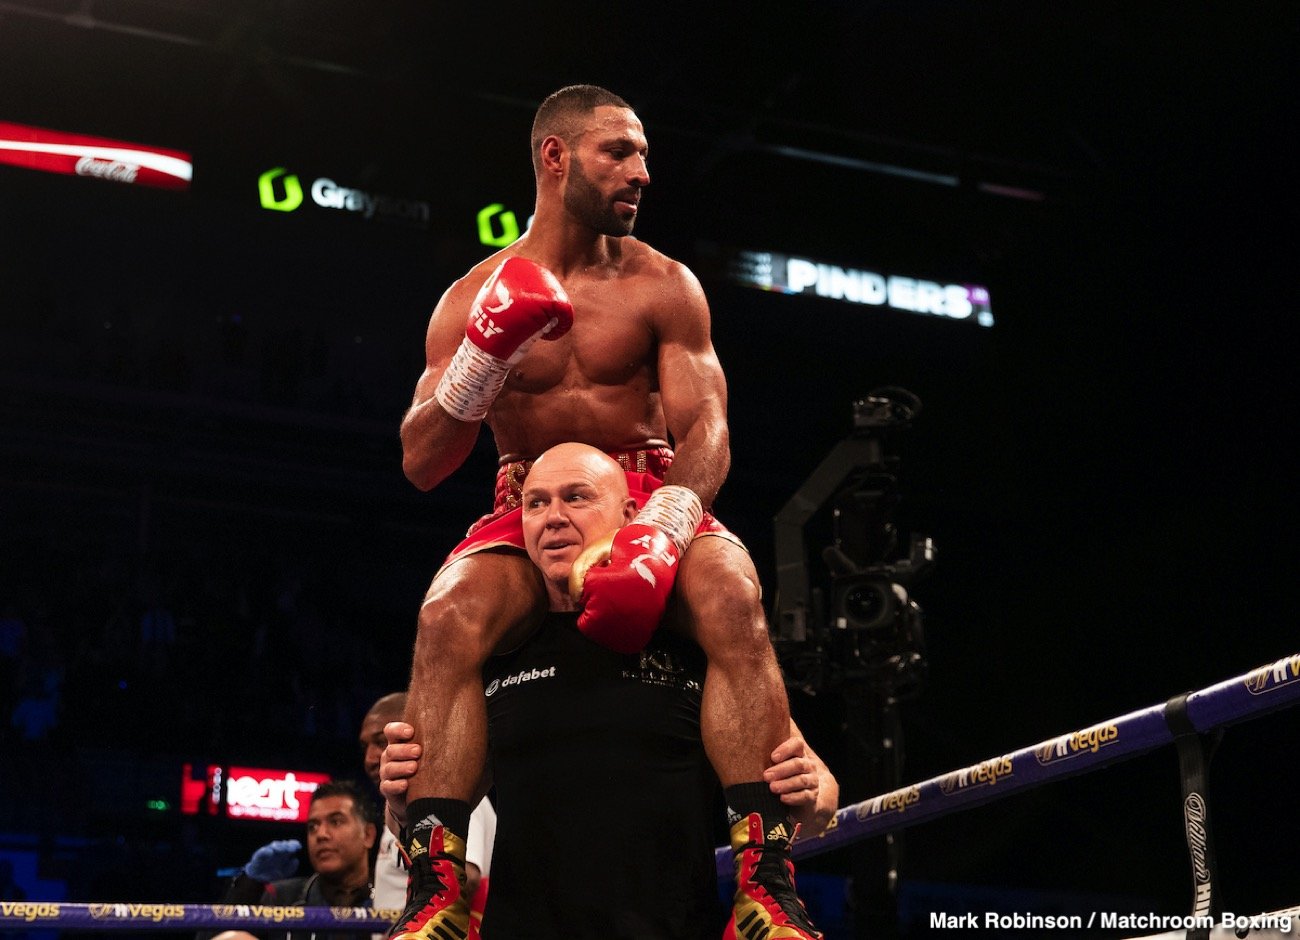 Image: Kell Brook could face Liam Smith next says Hearn